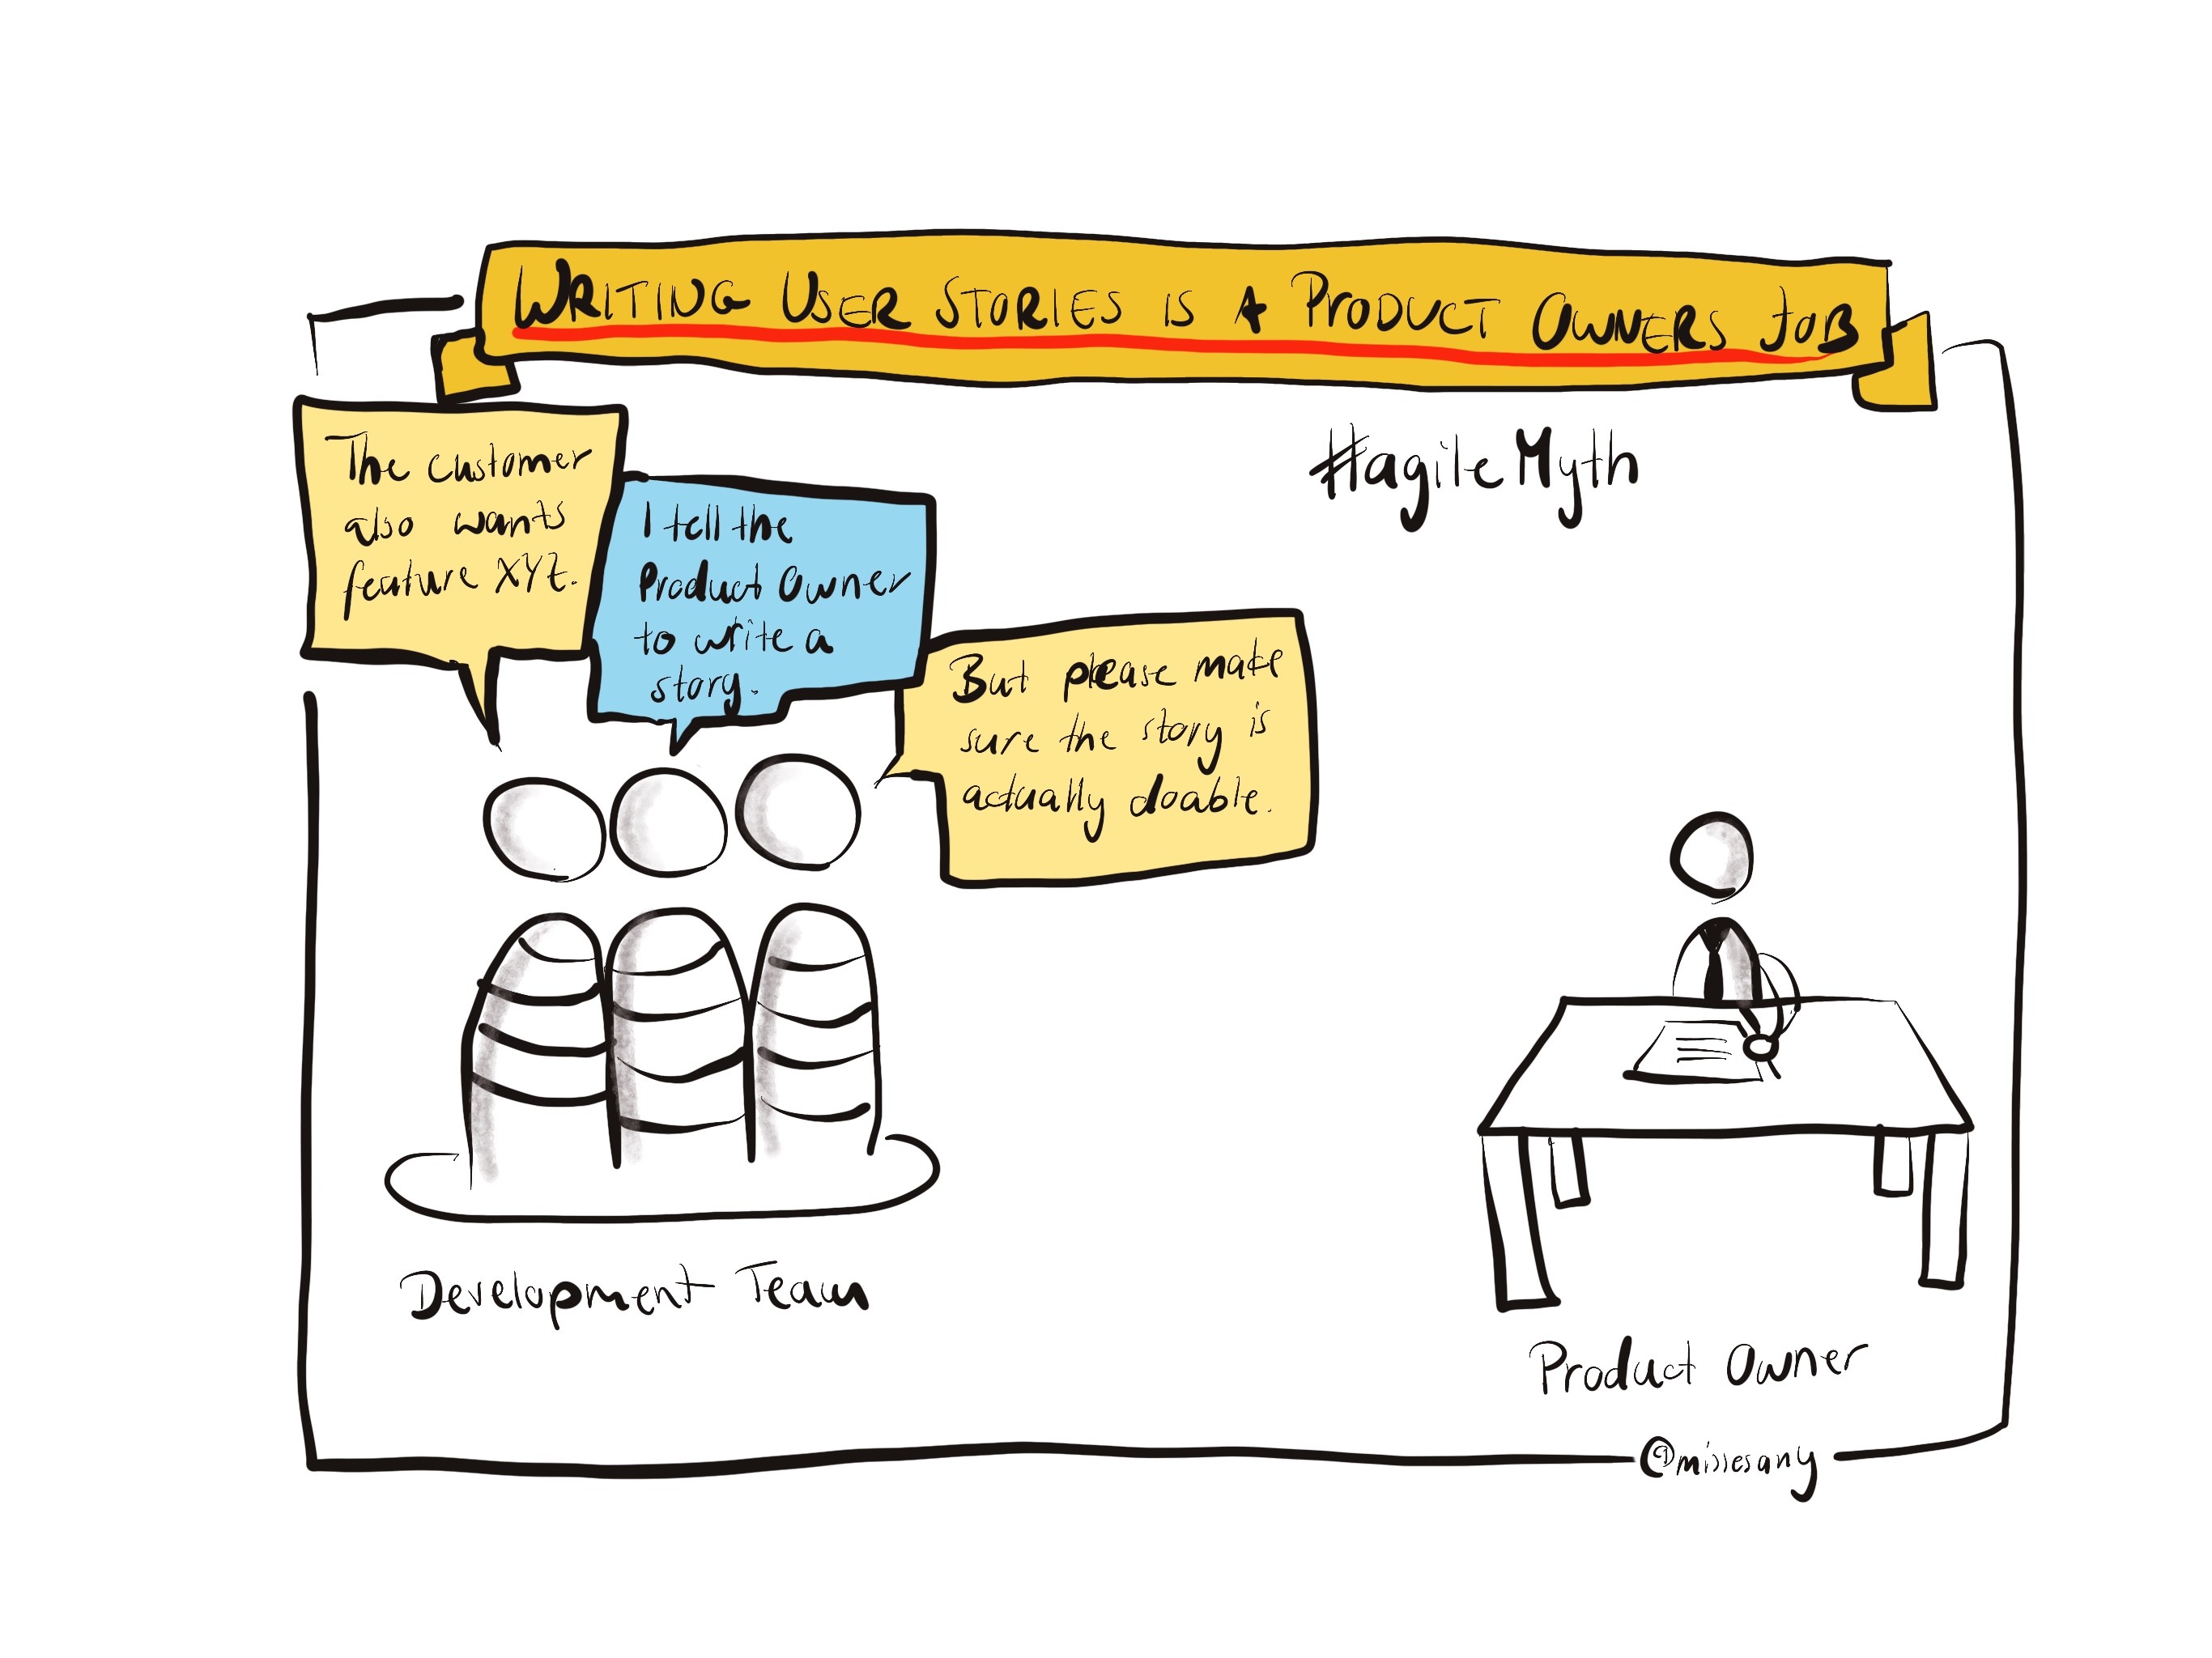 Agile myth: Writing user stories is Product Owner work - wibas blog